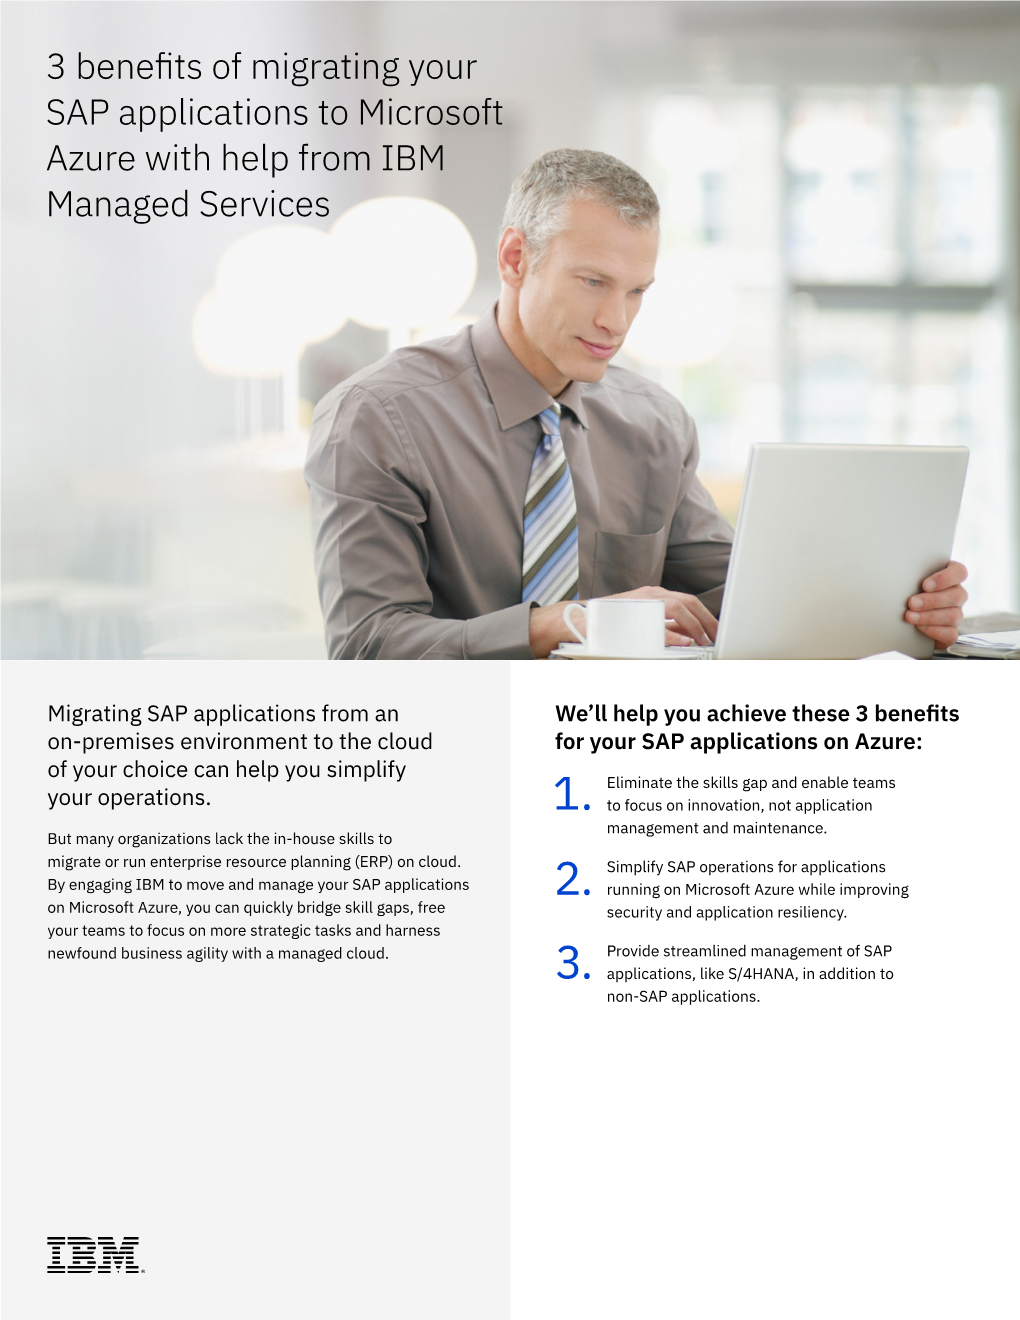 Simplify SAP Operations with IBM Managed Services on Azure